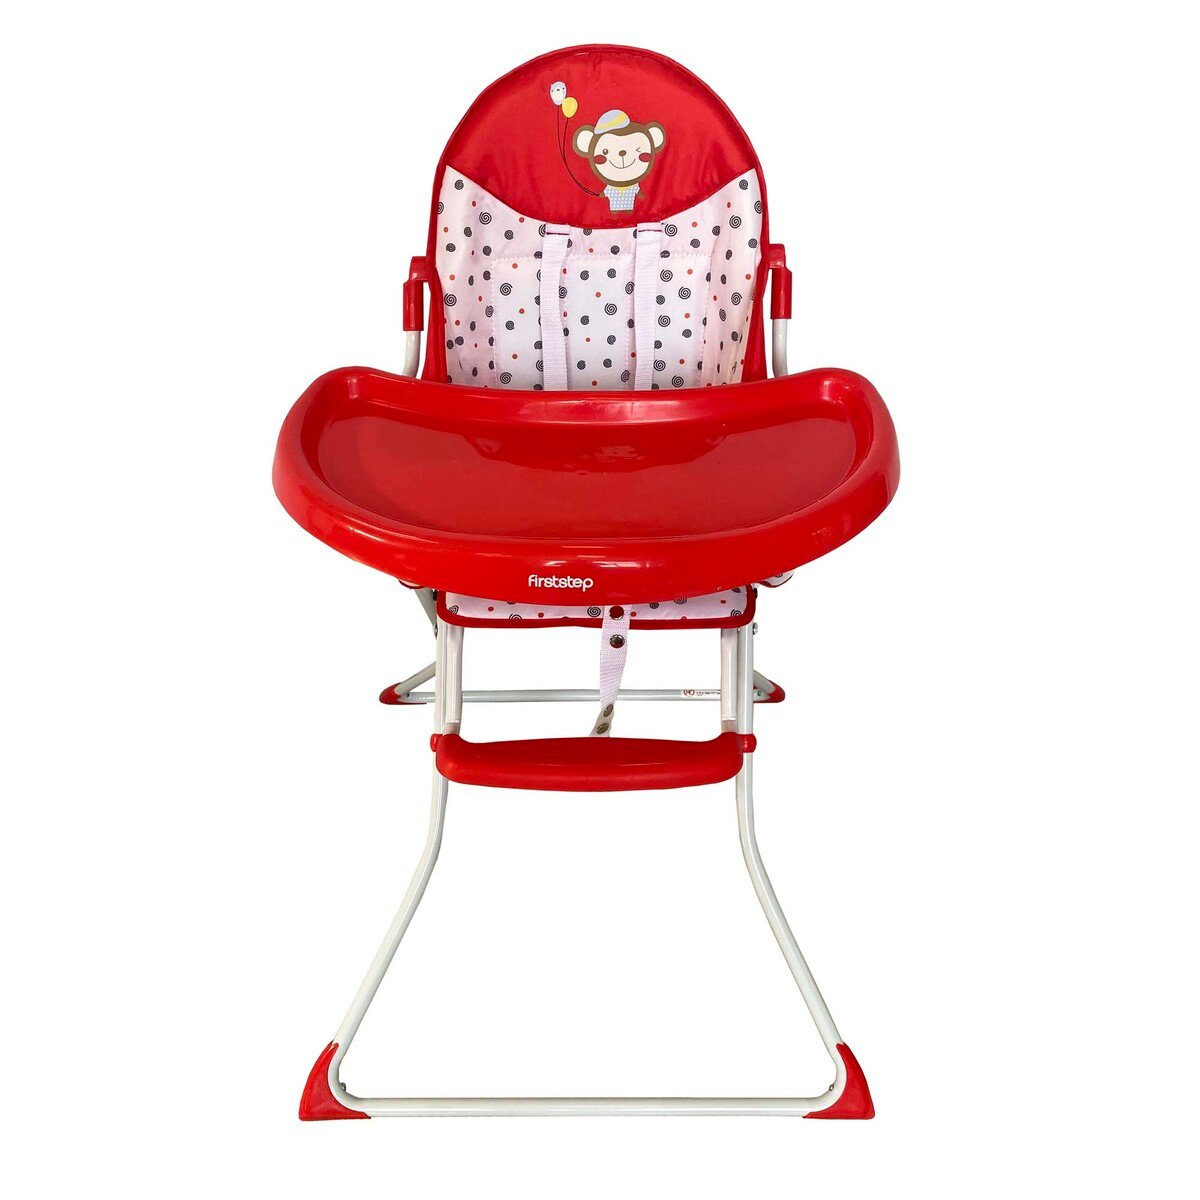 FirstStep First Step Baby High Chair H2001 Red